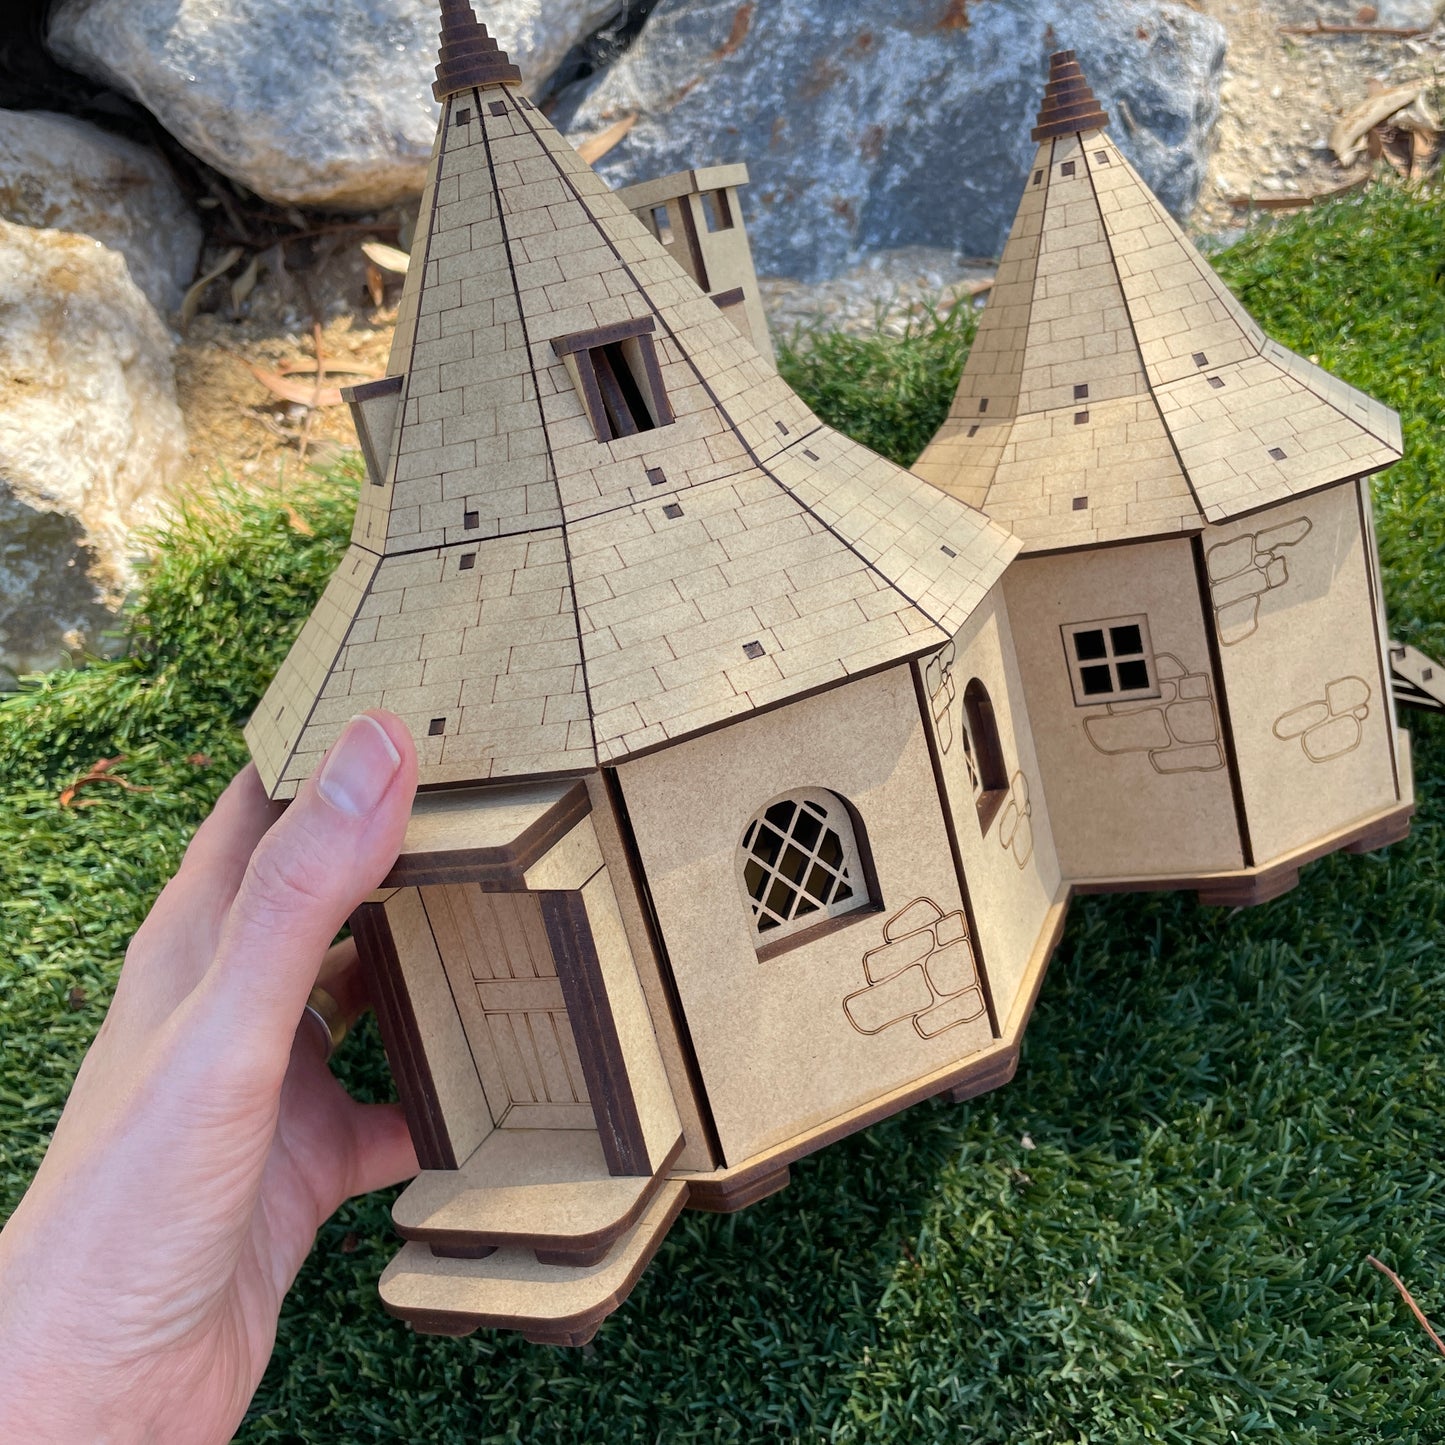 DIY KIT Groundskeeper Hut by the Magical School for Witches and Wizards